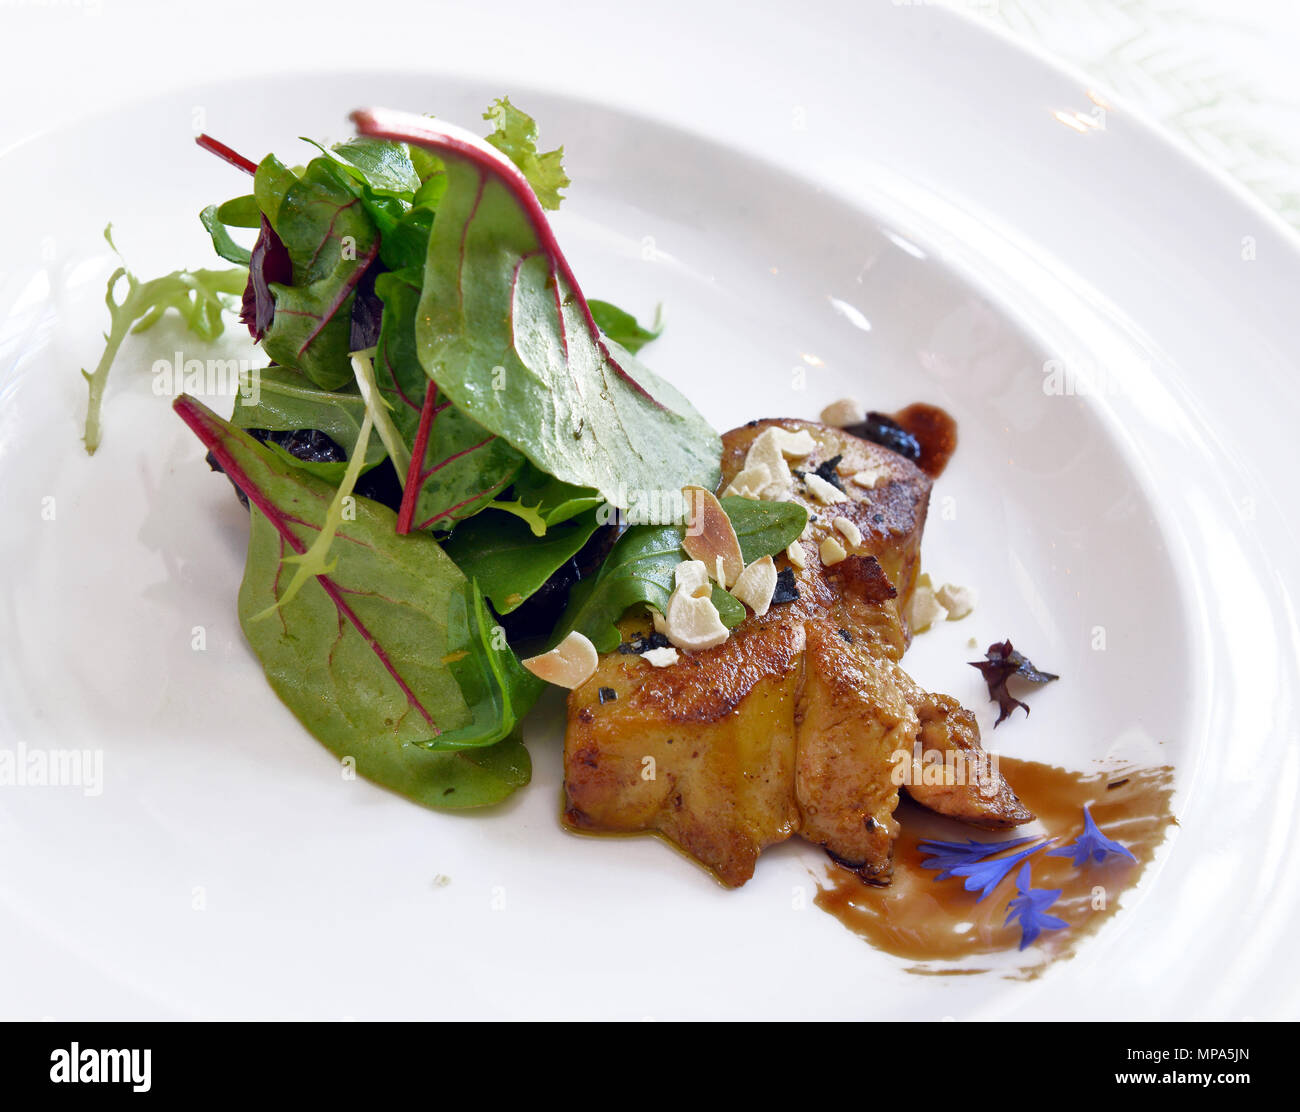 foie gras with salad and jam Stock Photo